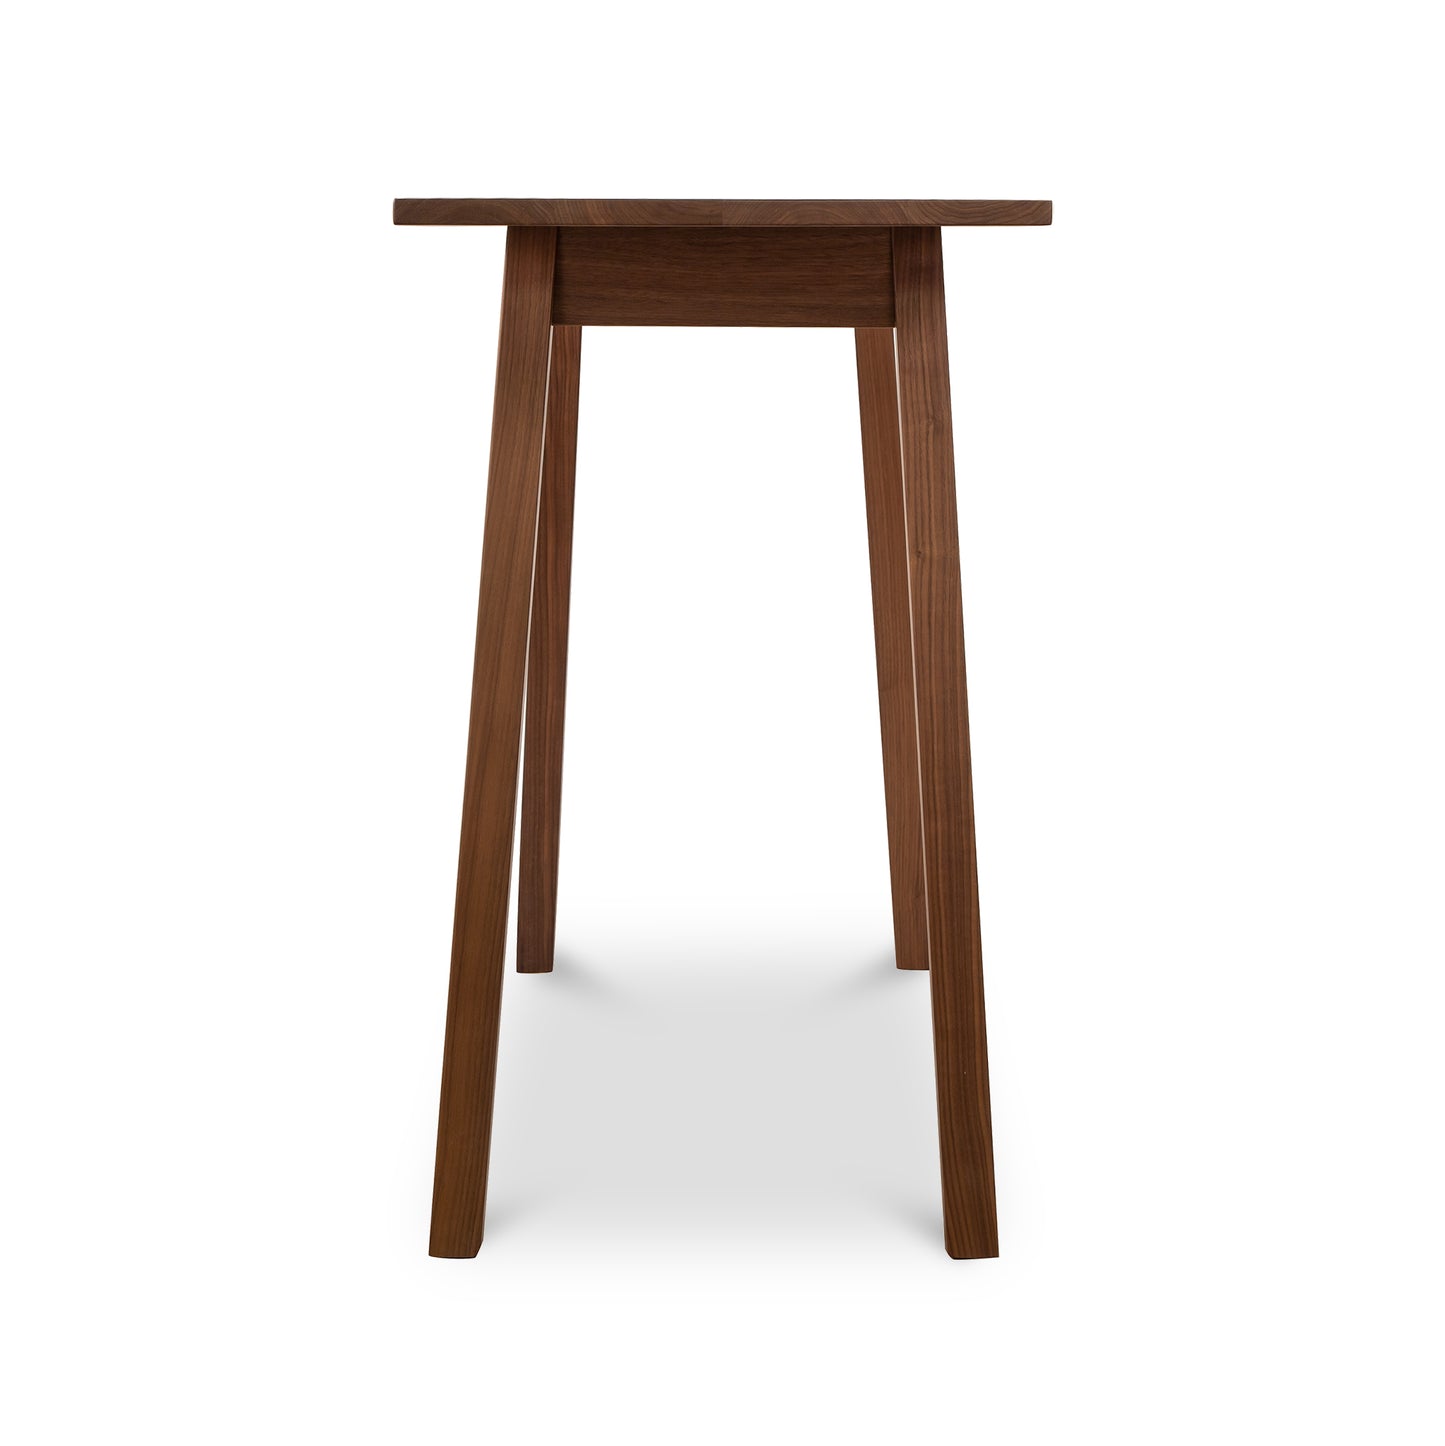 A wooden table with two legs on a white background.